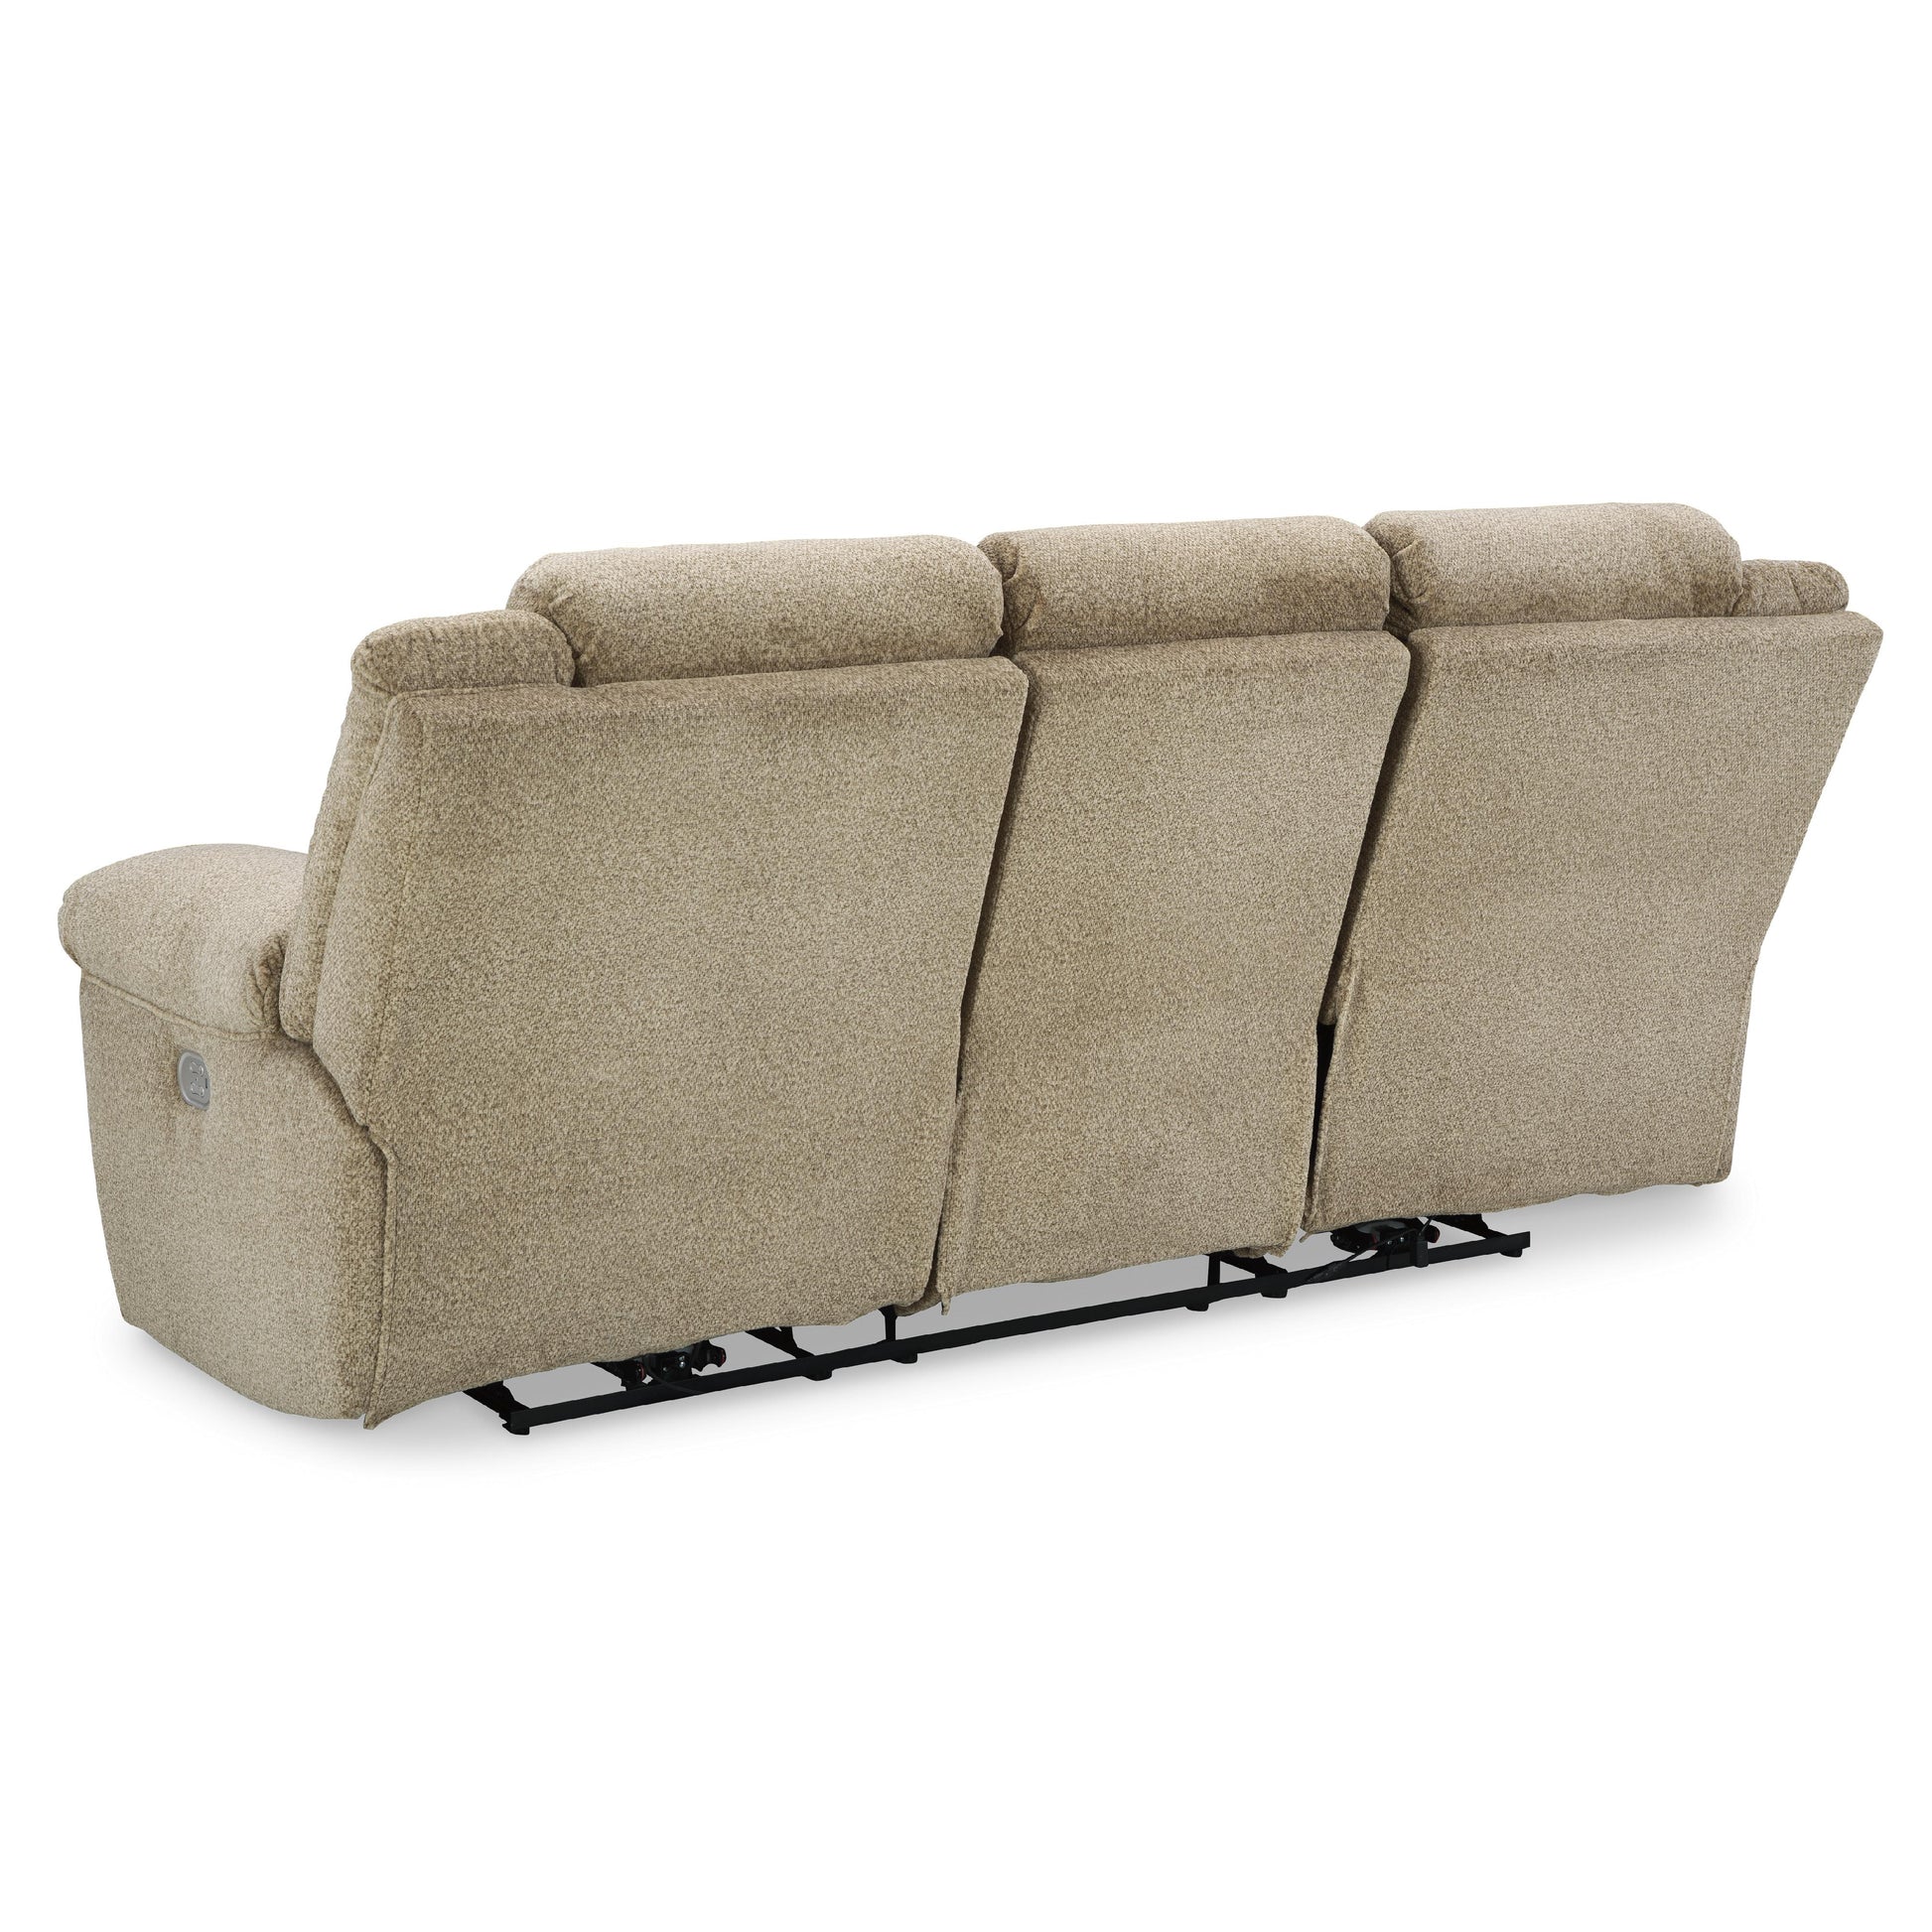 Signature Design by Ashley Tip-Off Power Reclining Sofa 6930515 IMAGE 6